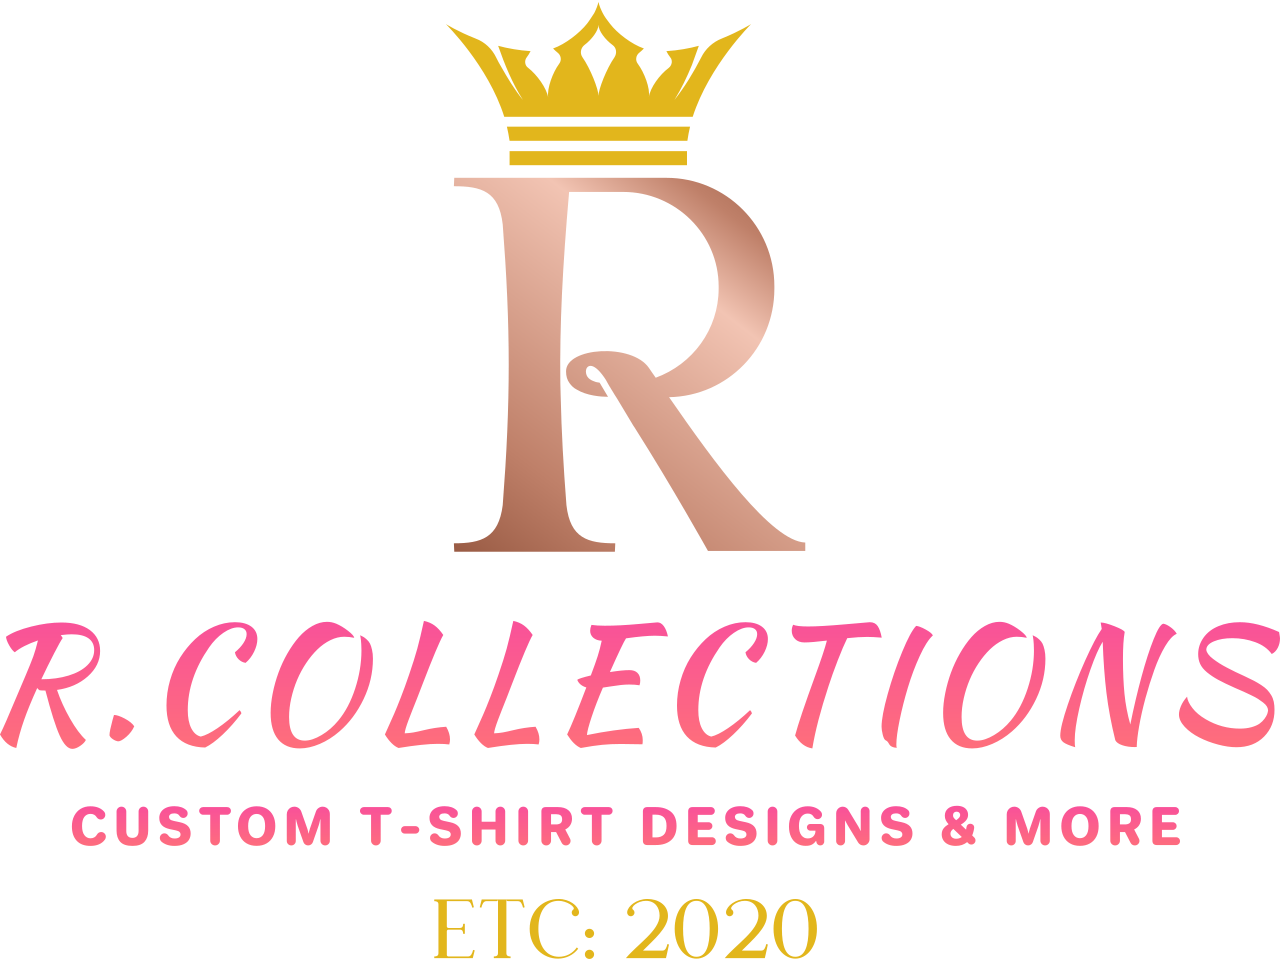 R.Collections's logo